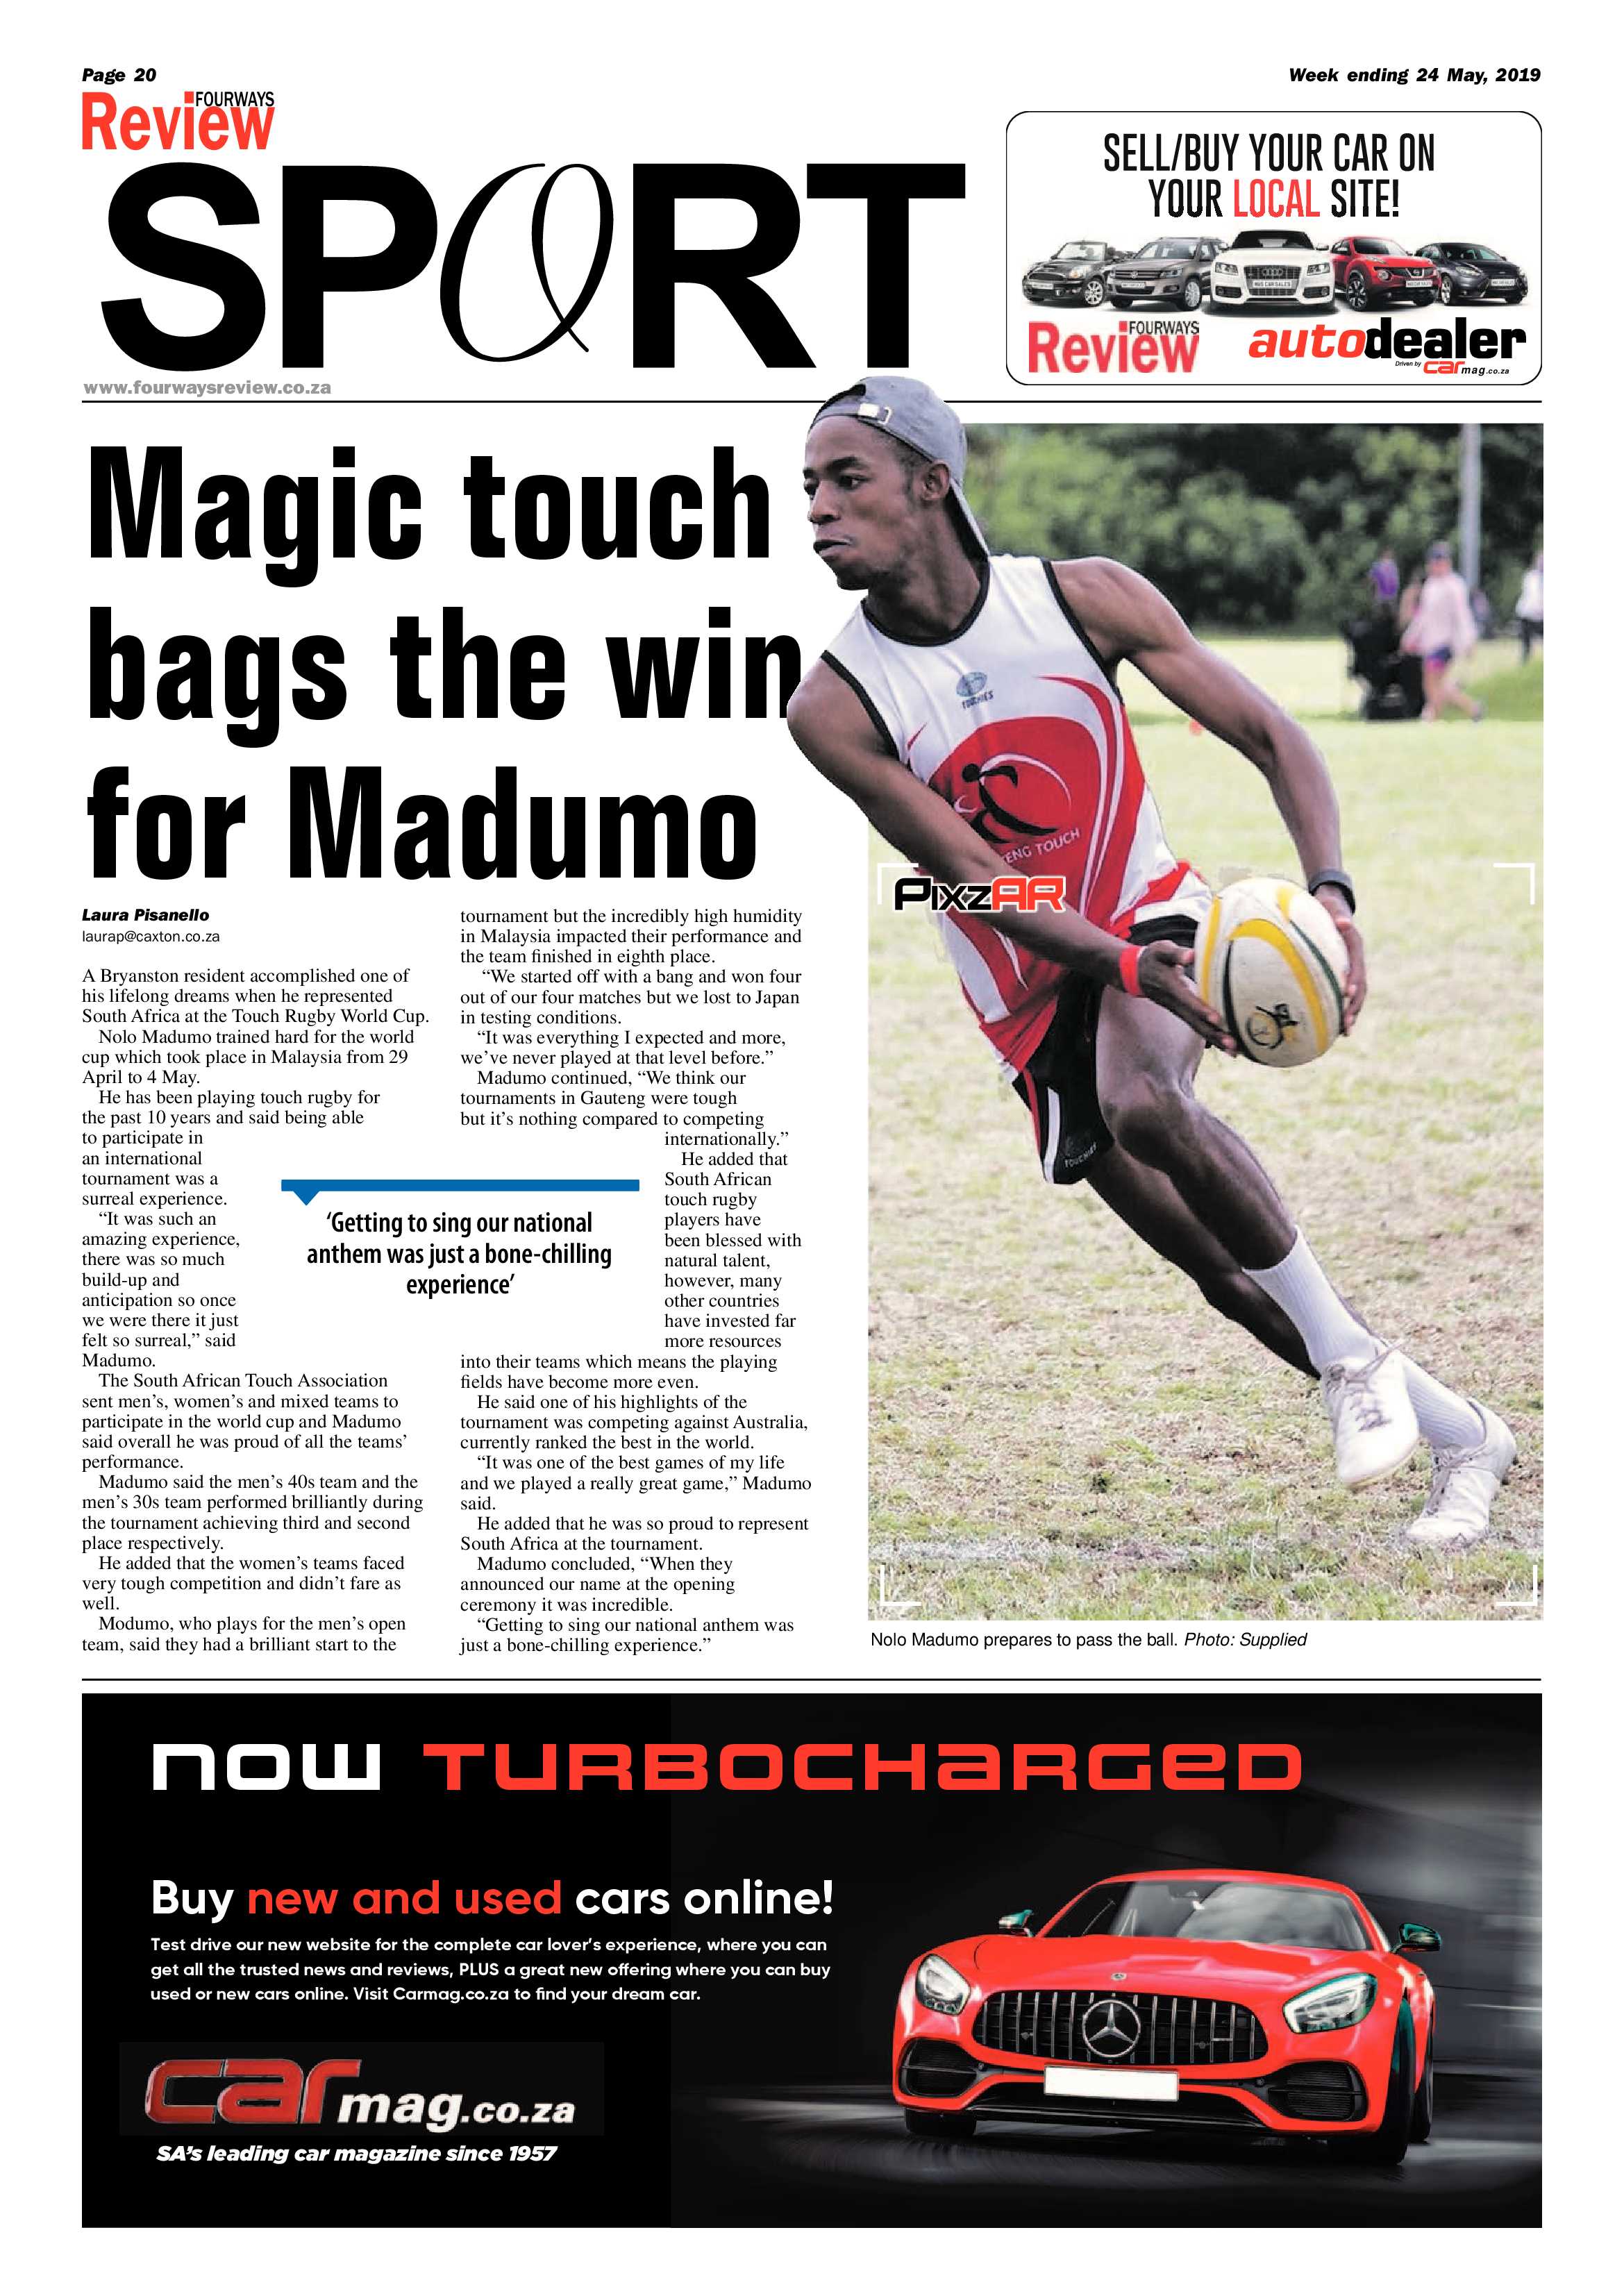 Fourways Review 24 May, 2019 page 20